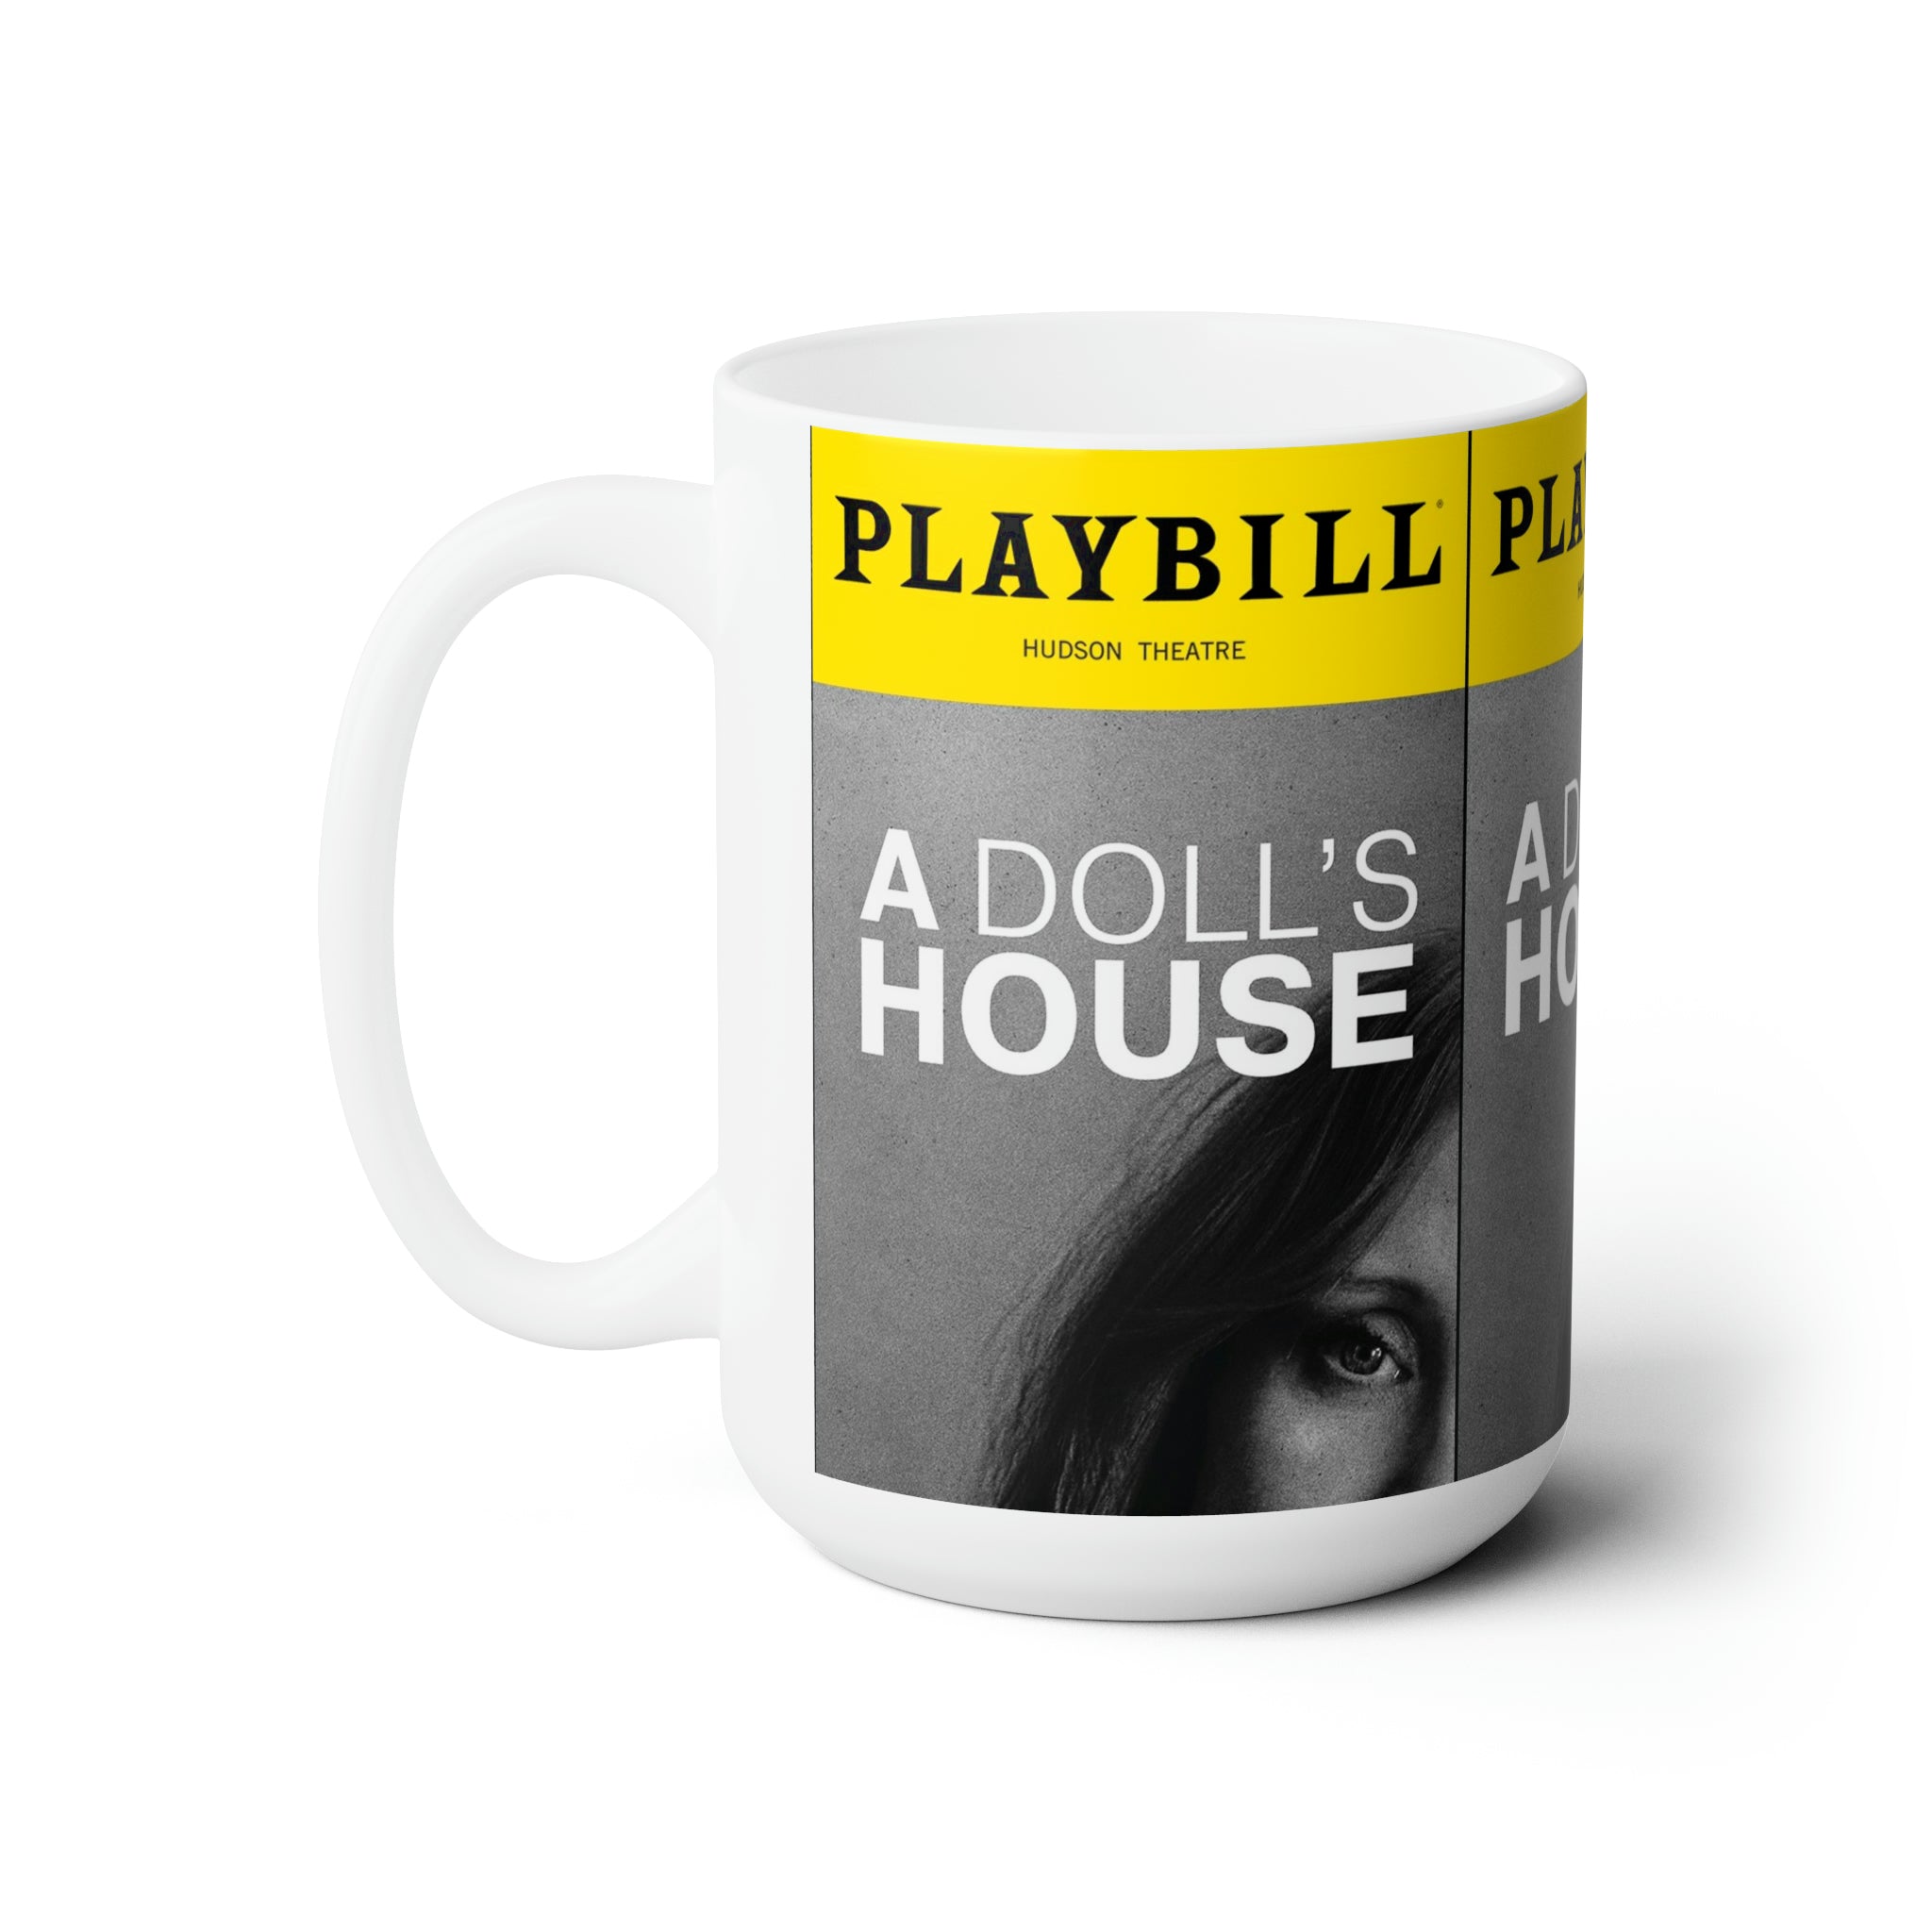 https://creationsbychrisandcarlos.store/products/a-dolls-place-broadway-play-white-ceramic-mug